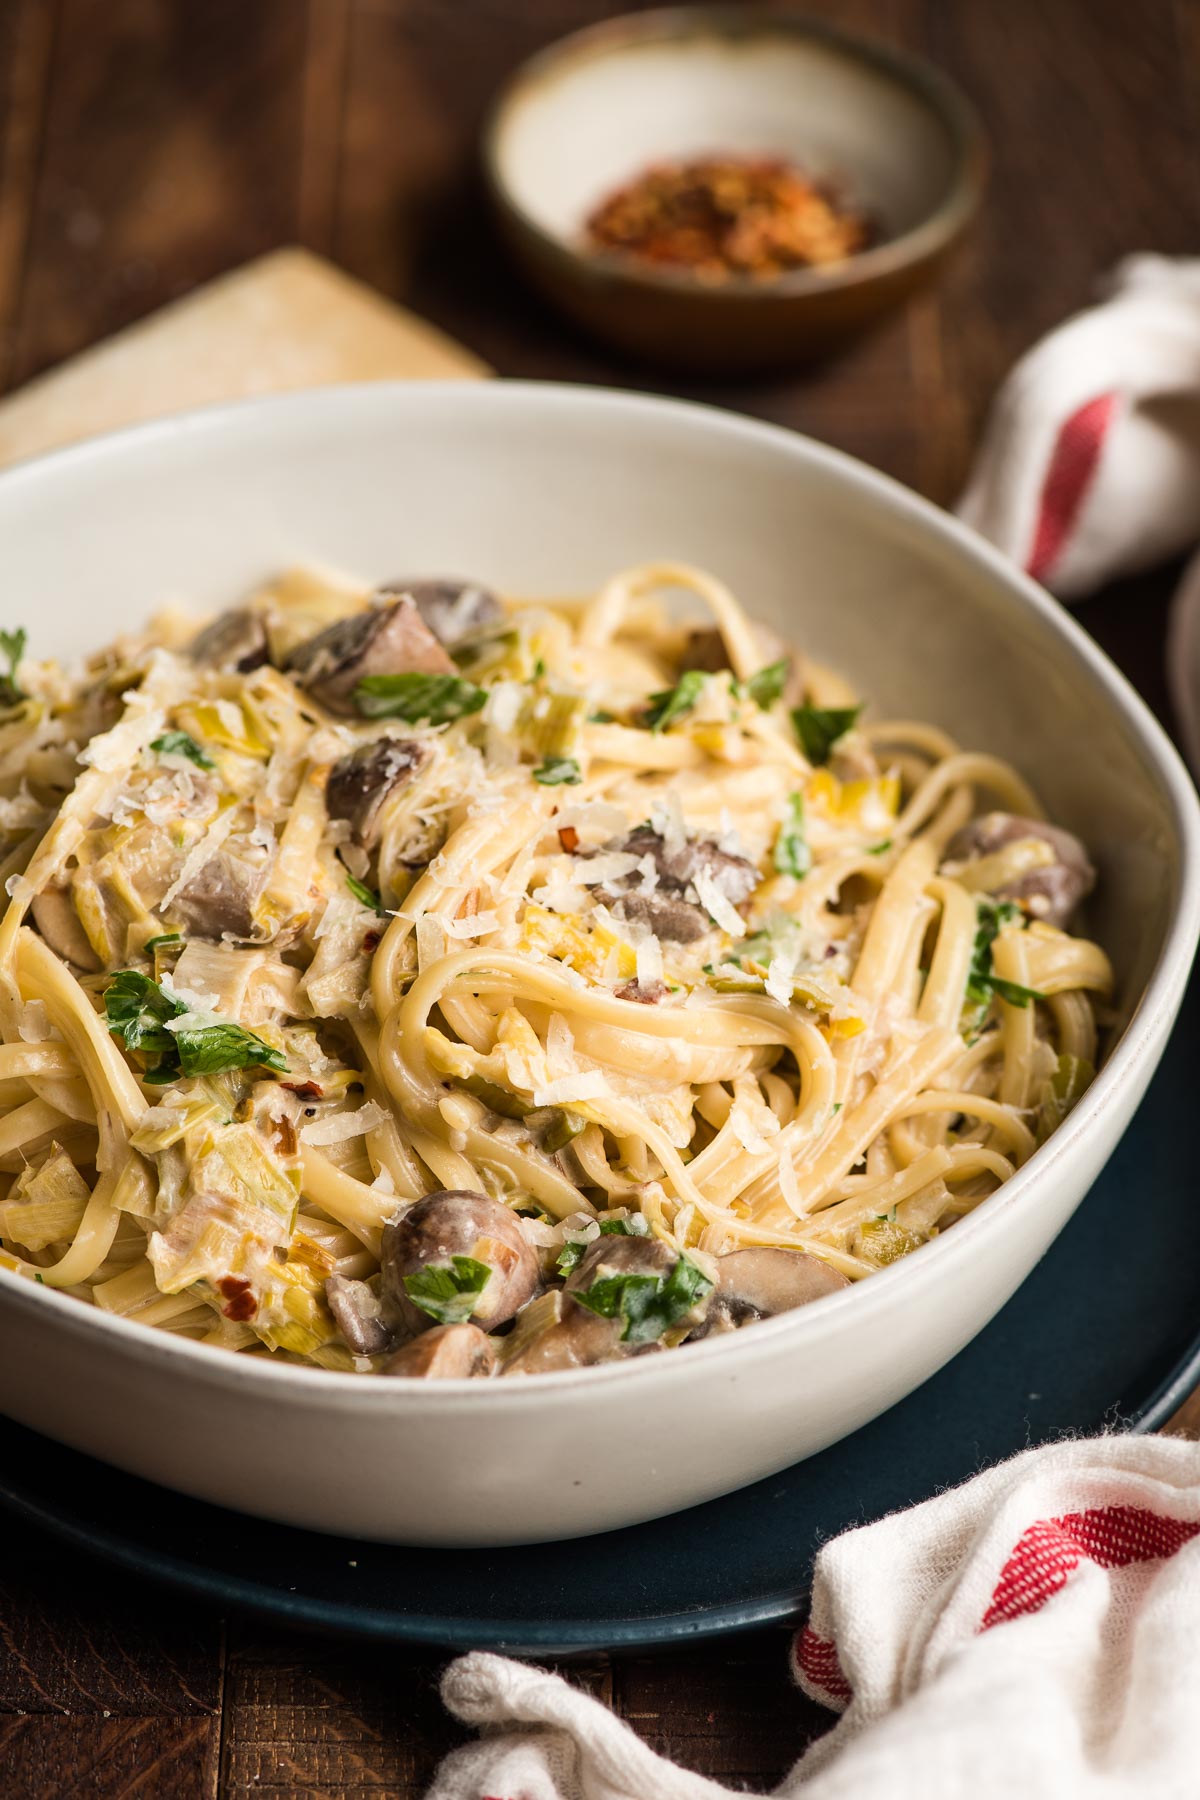 White bowl filled with linguine, mushrooms, and leeks in a creamy sauce.